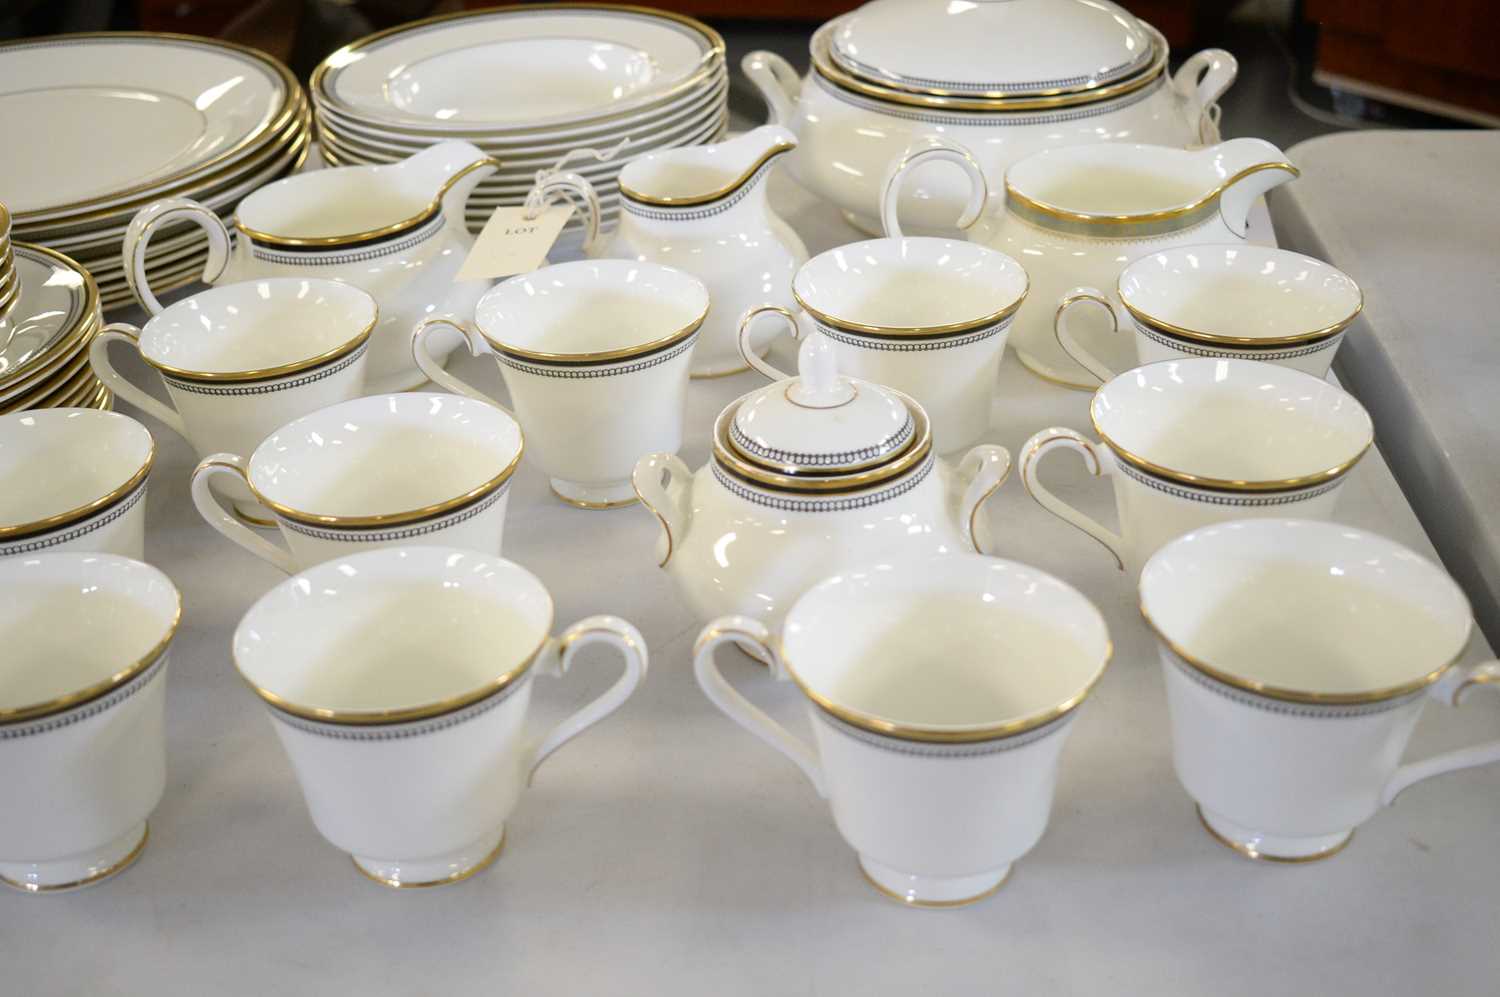 Royal Doulton Pavanne tea and dinner service. - Image 3 of 3